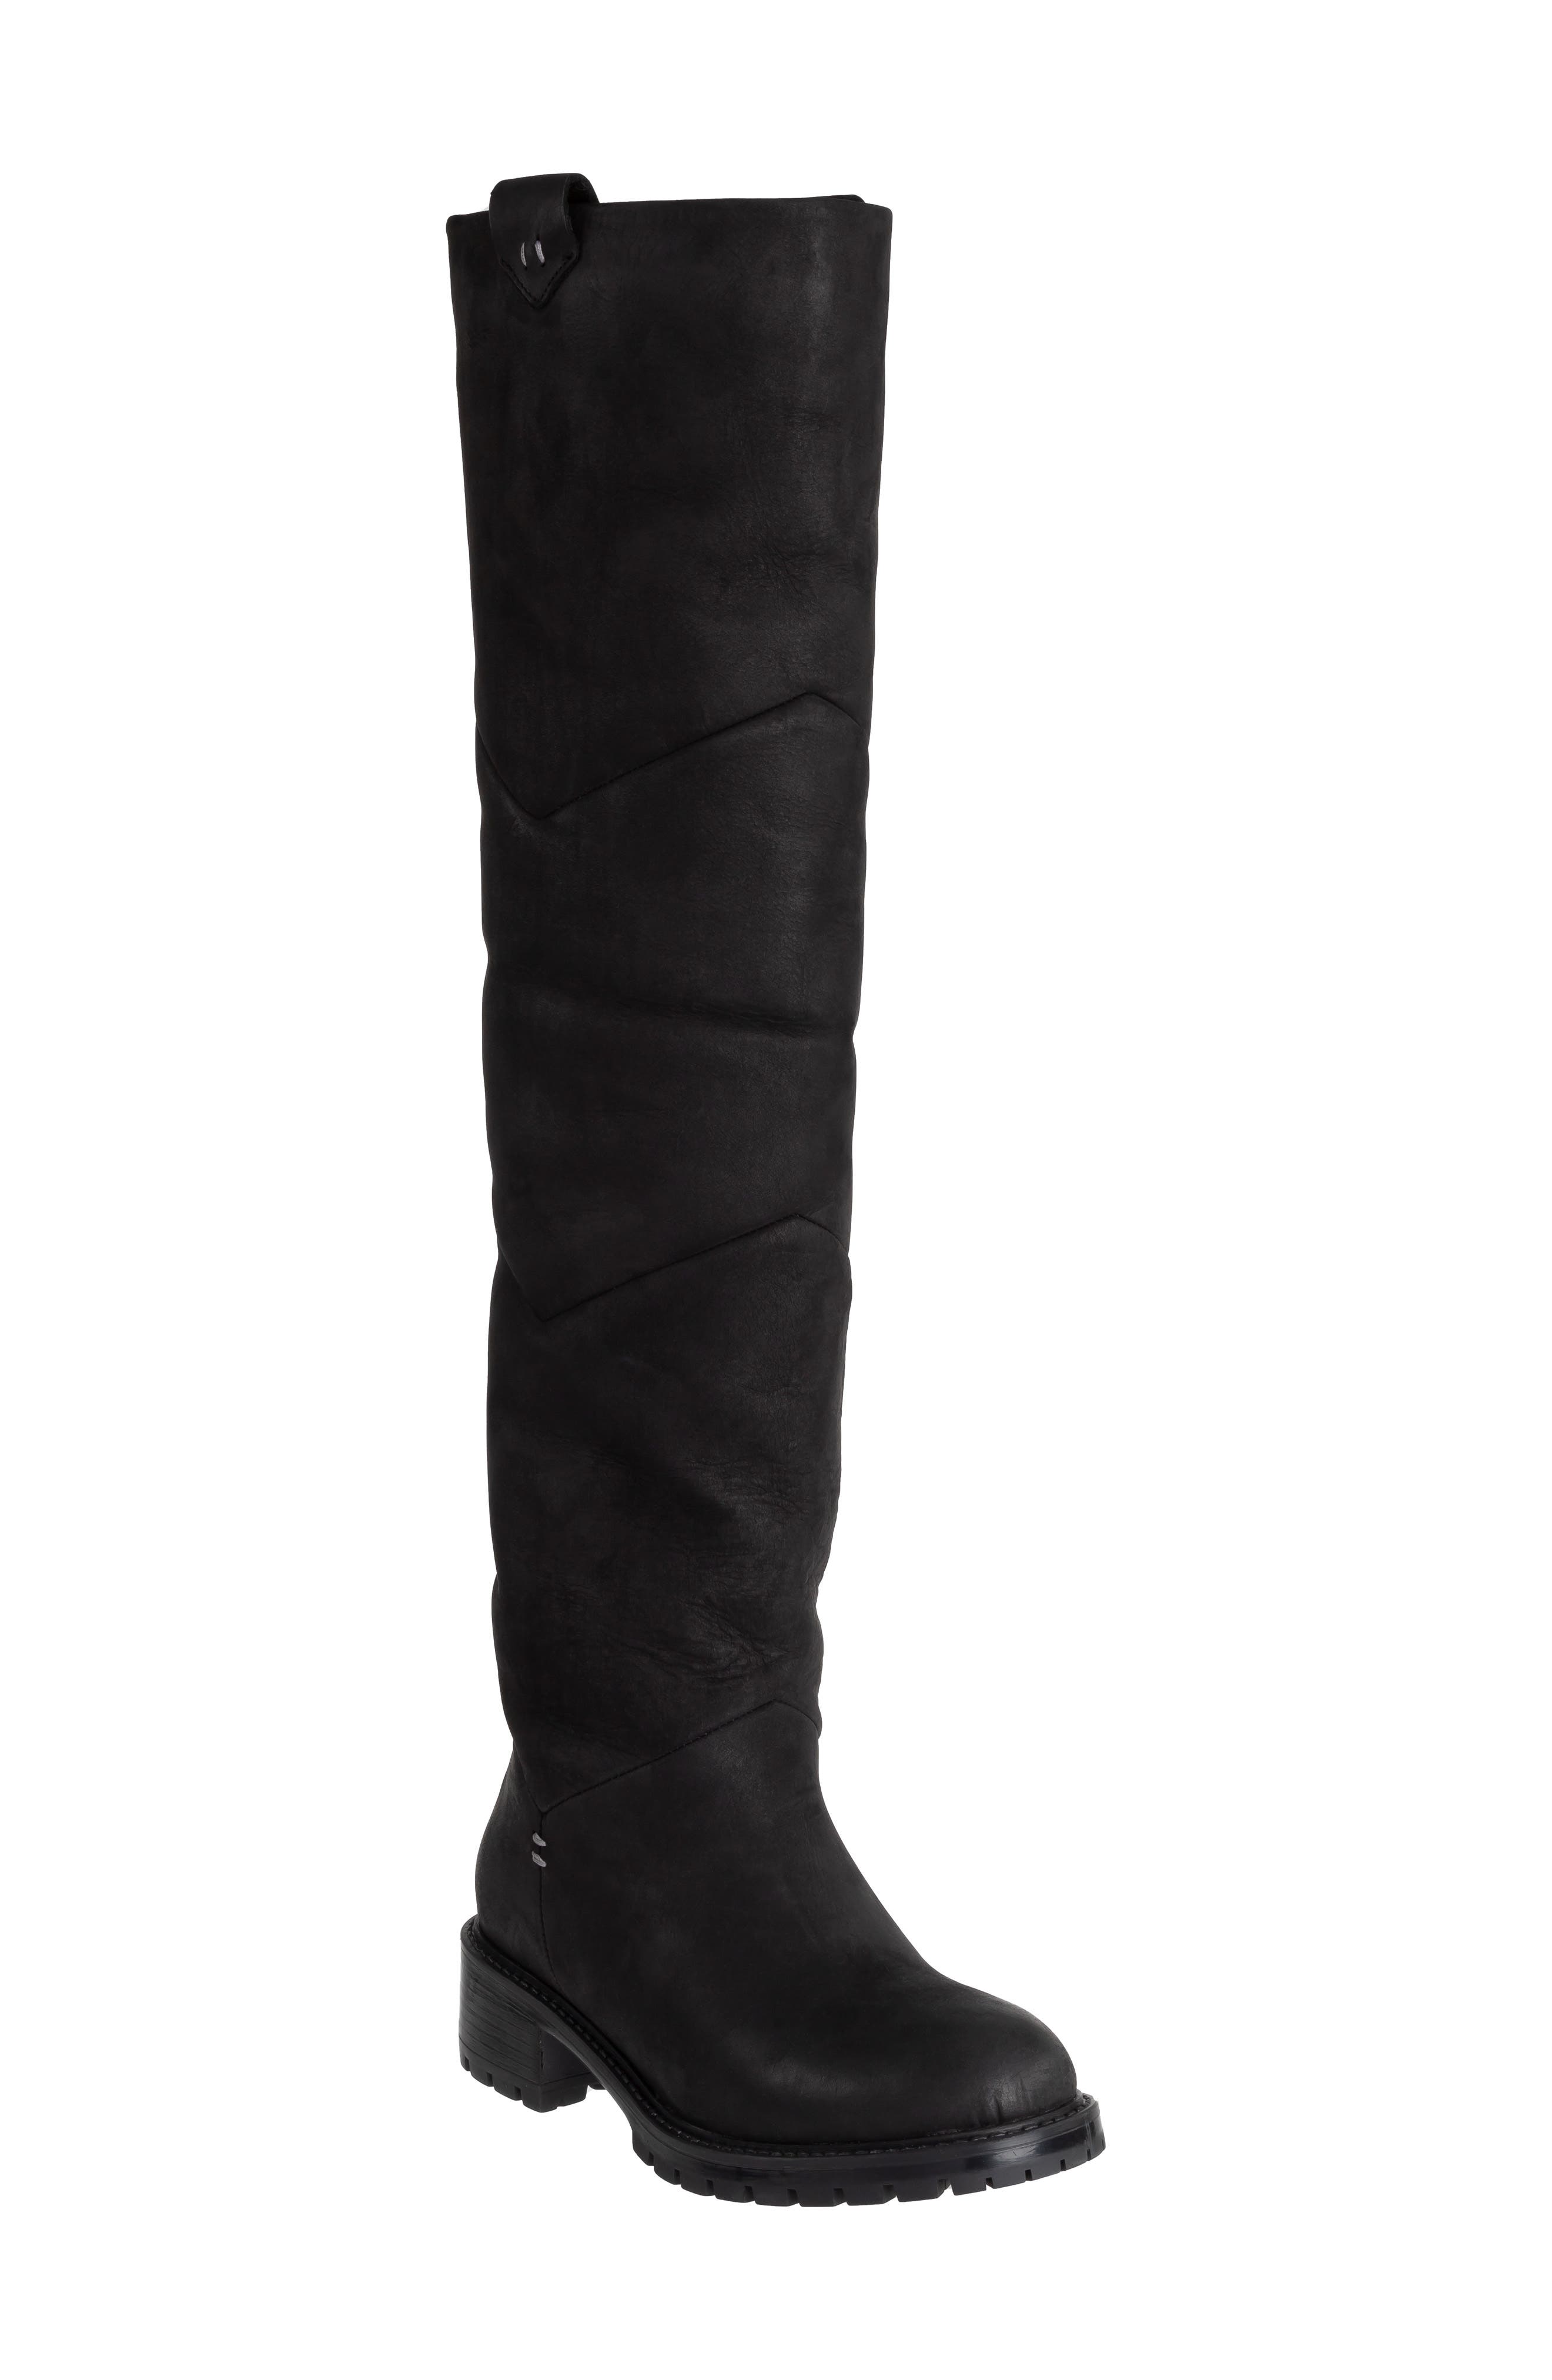 thigh high shearling boots